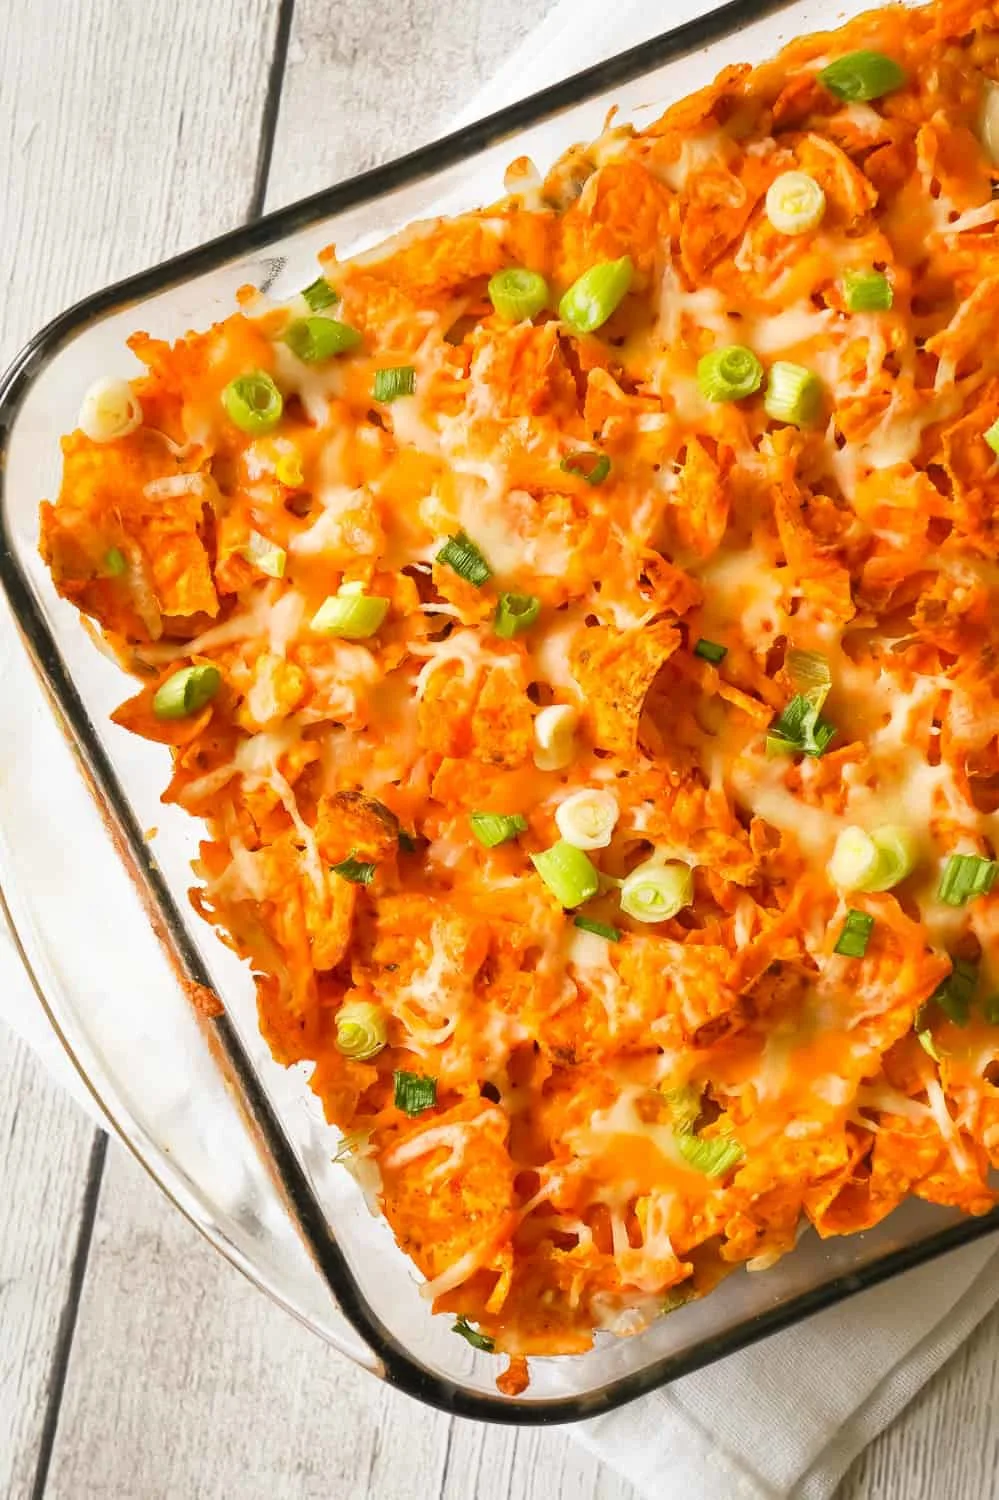 Doritos Casserole with Ground Beef is an easy dinner recipe the whole family will love. This hearty casserole is loaded with ground beef, cream cheese, corn, black beans, shredded cheese and topped with crumbled Doritos.